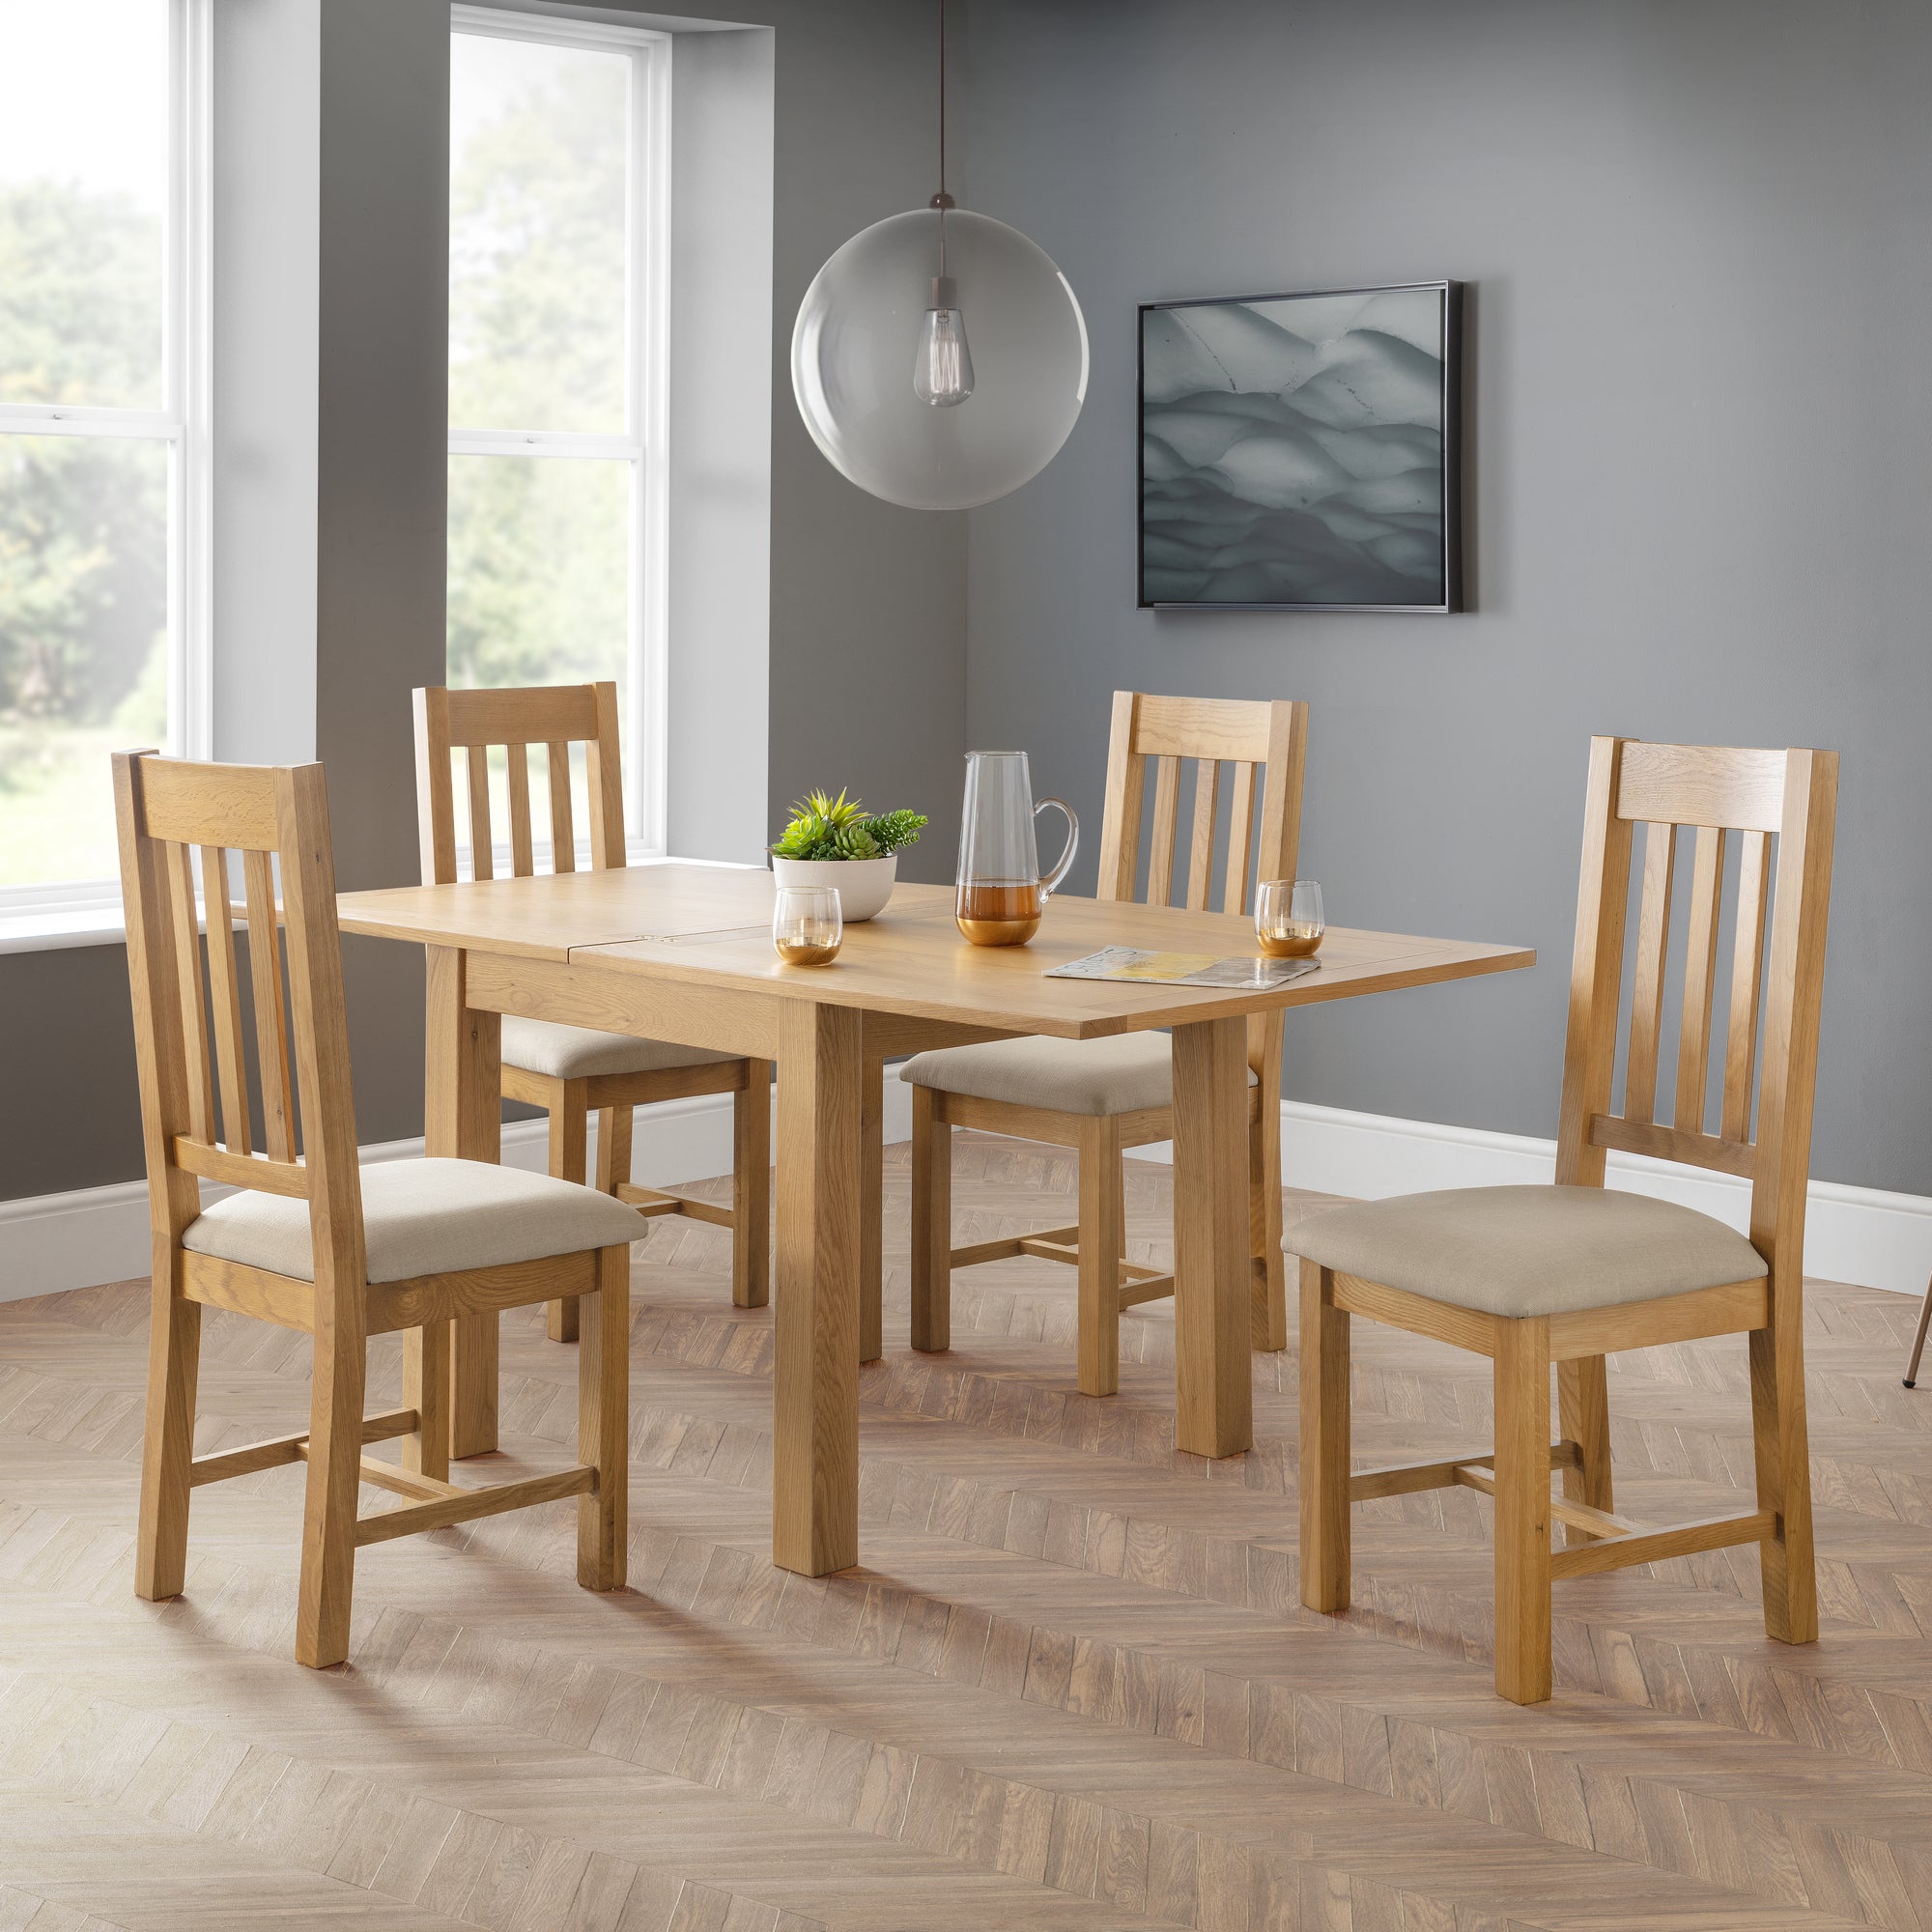 Astoria Square Flip Top Dining Table With 4 Hereford Chairs Solid Oak Light Oak